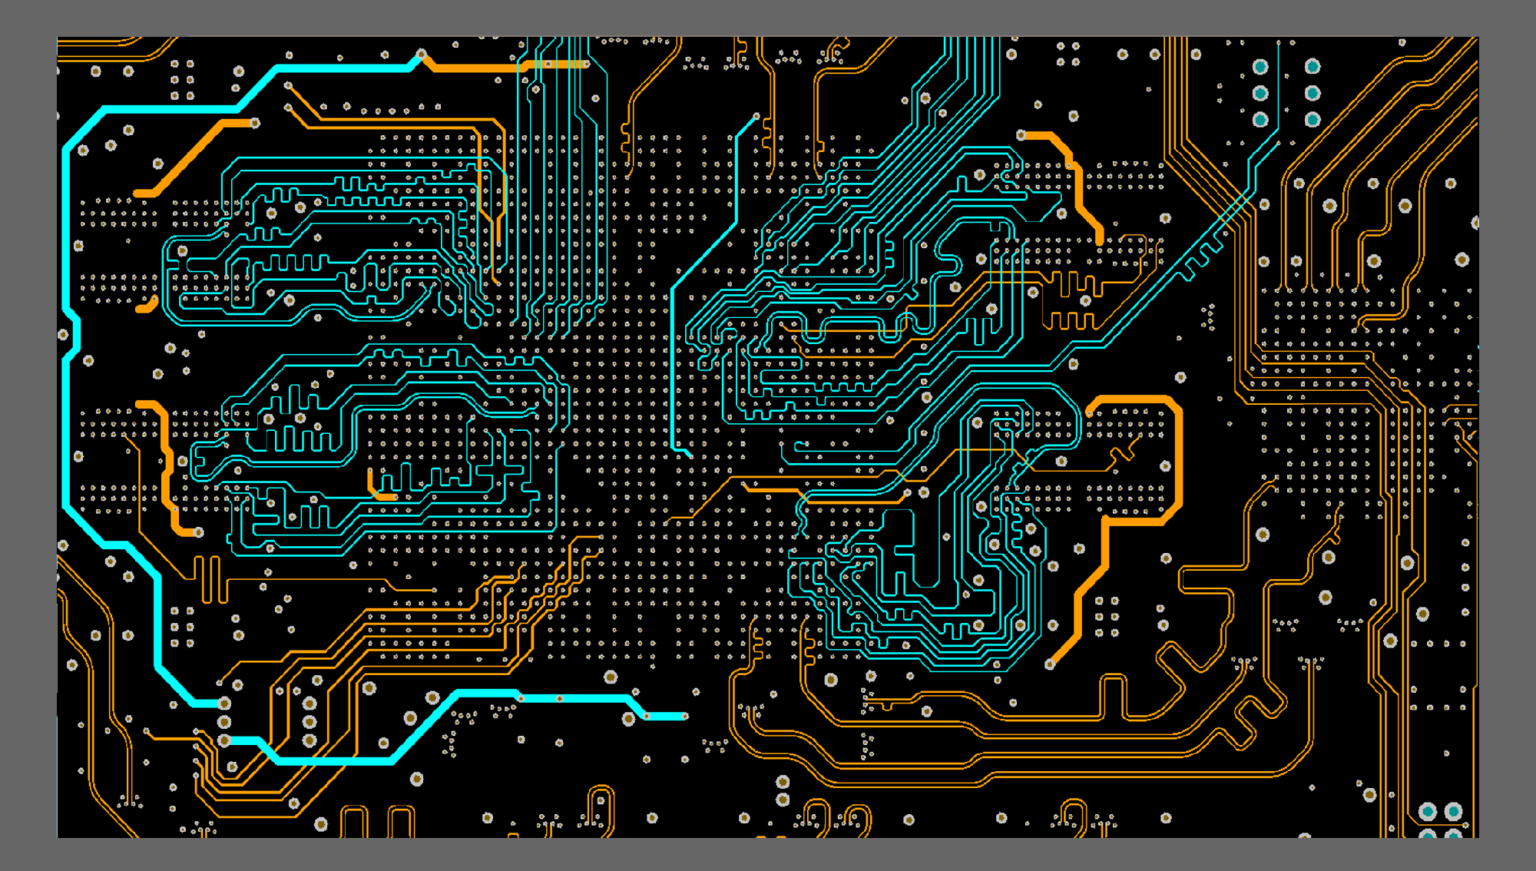 What is the PCB design?